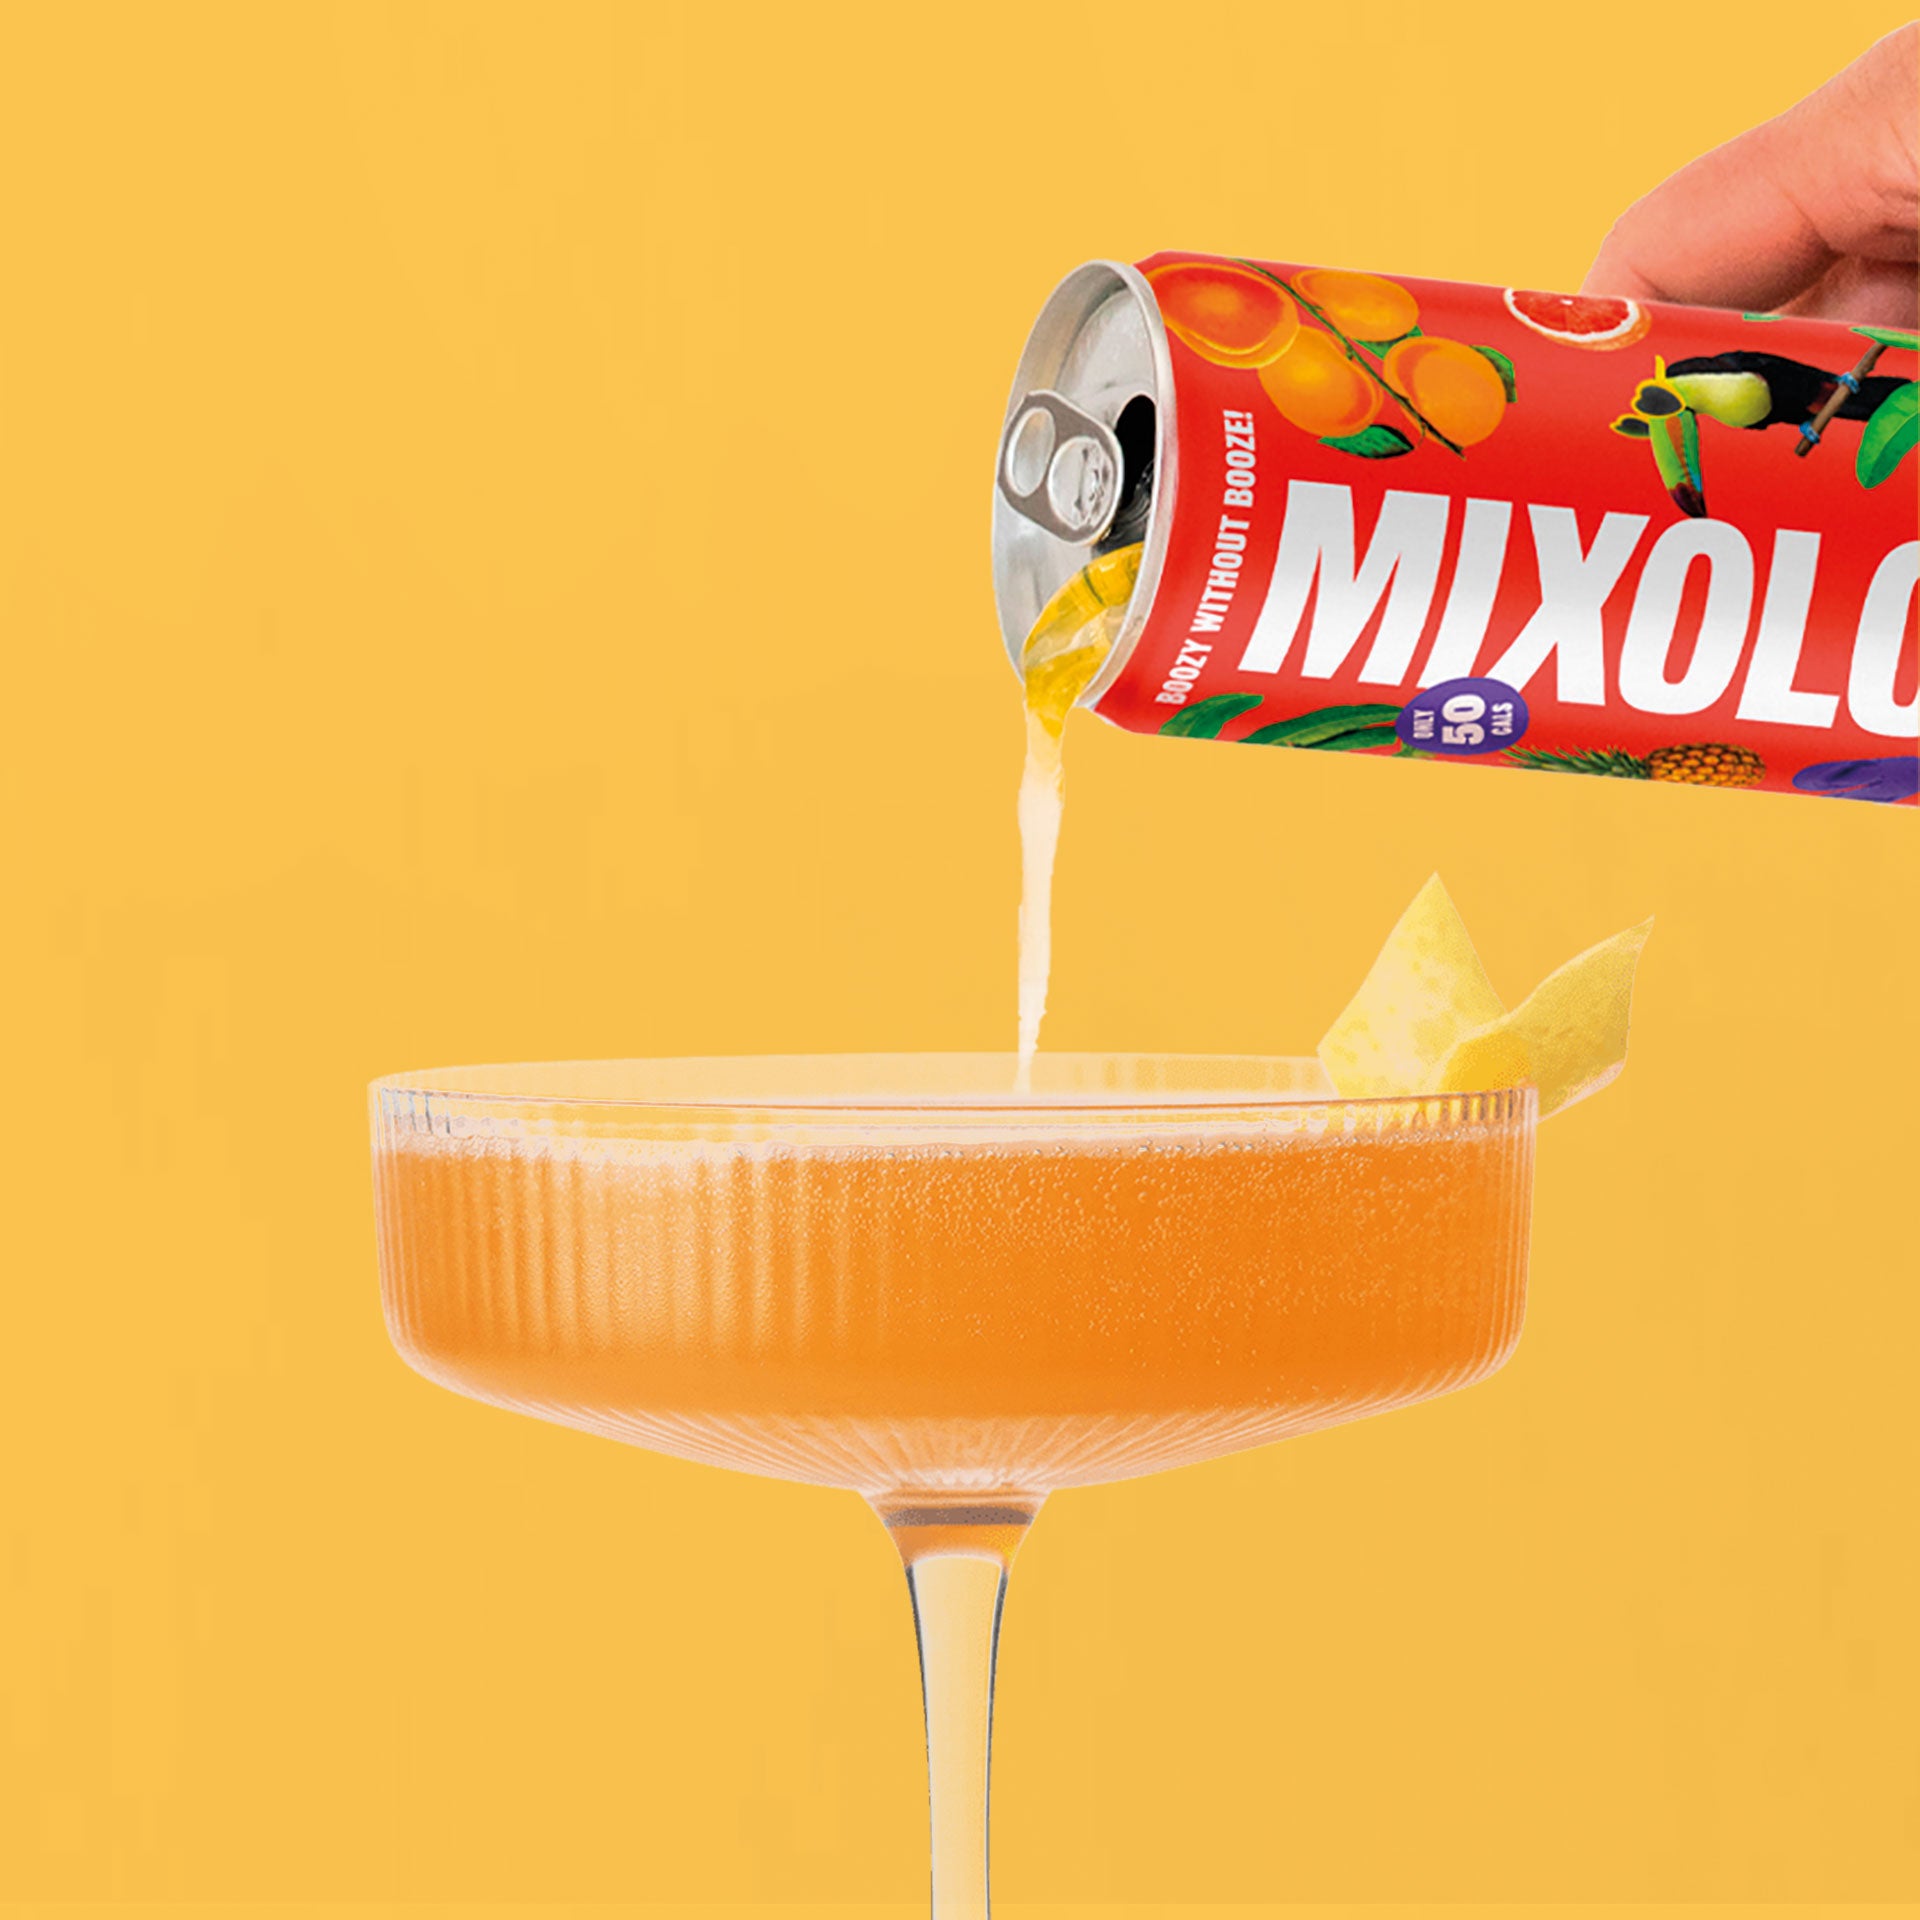 Mixoloshe as Mixer - Mix and match MIXOLOSHE with your favs and enjoy as healthy Low- or No-ABV Cocktail